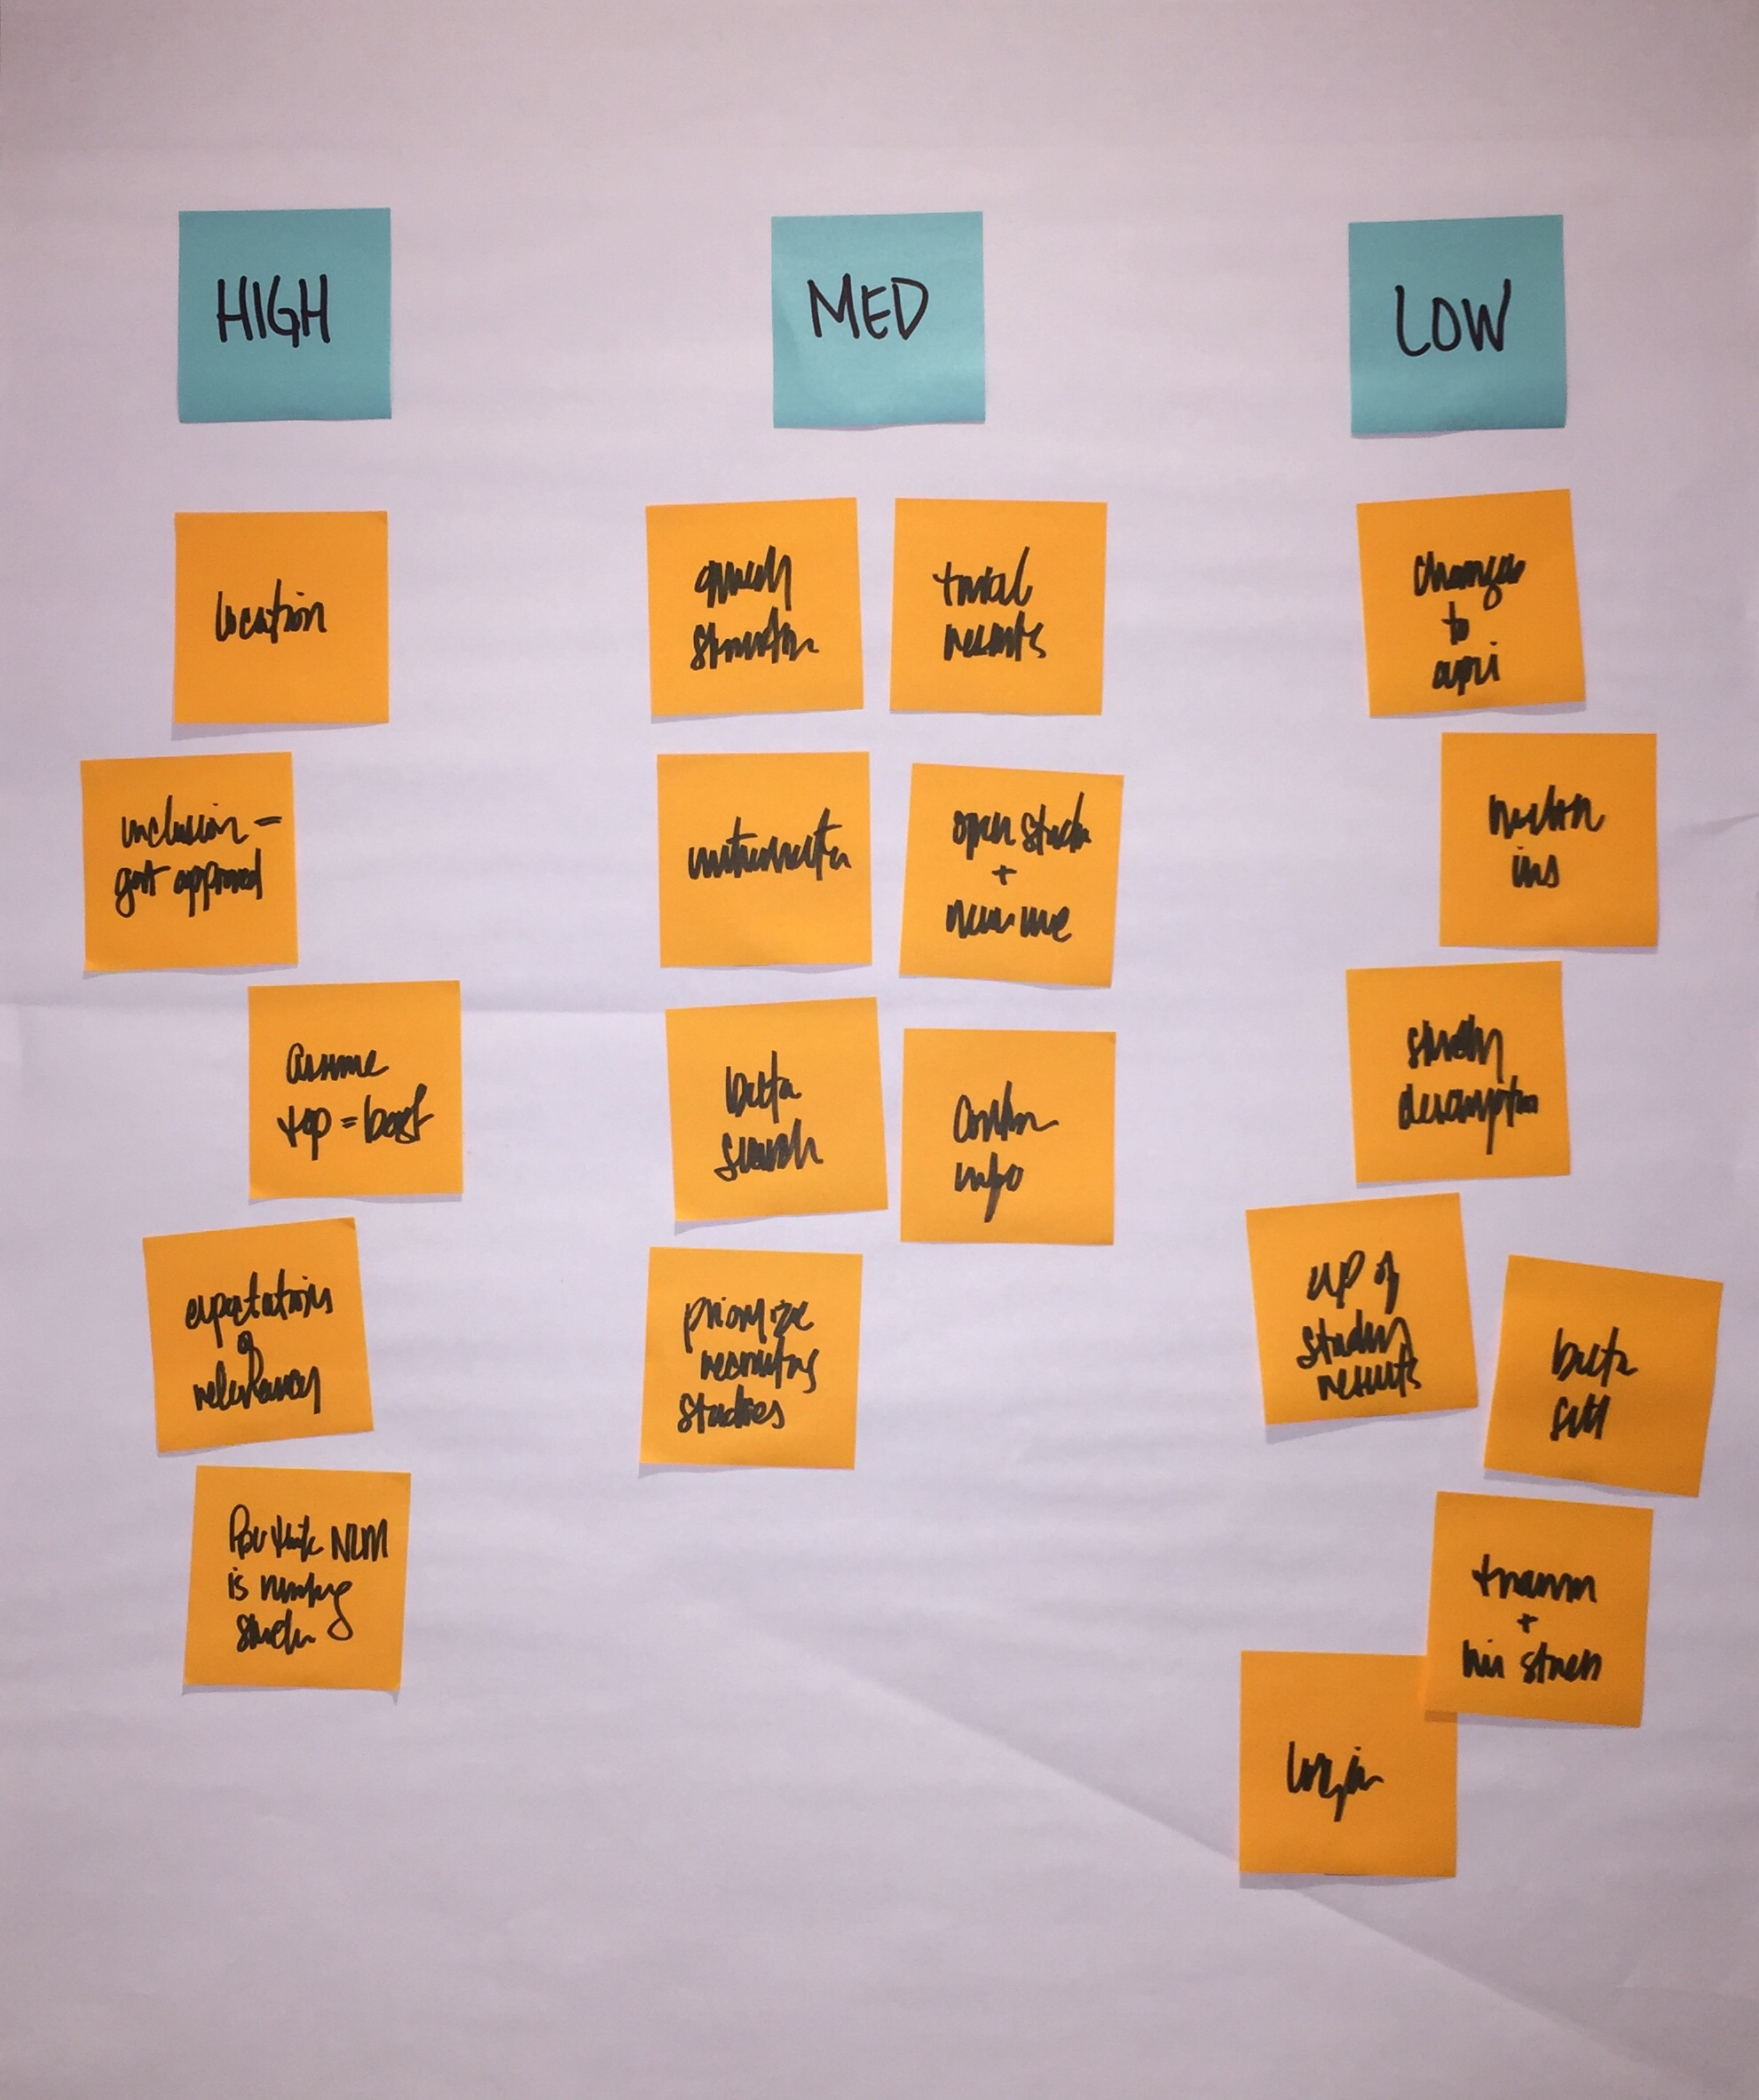 image of a large white butcher paper with three columns.  Each column has a header that relate to level of priority - High, medium, low. Below each header are various post-its